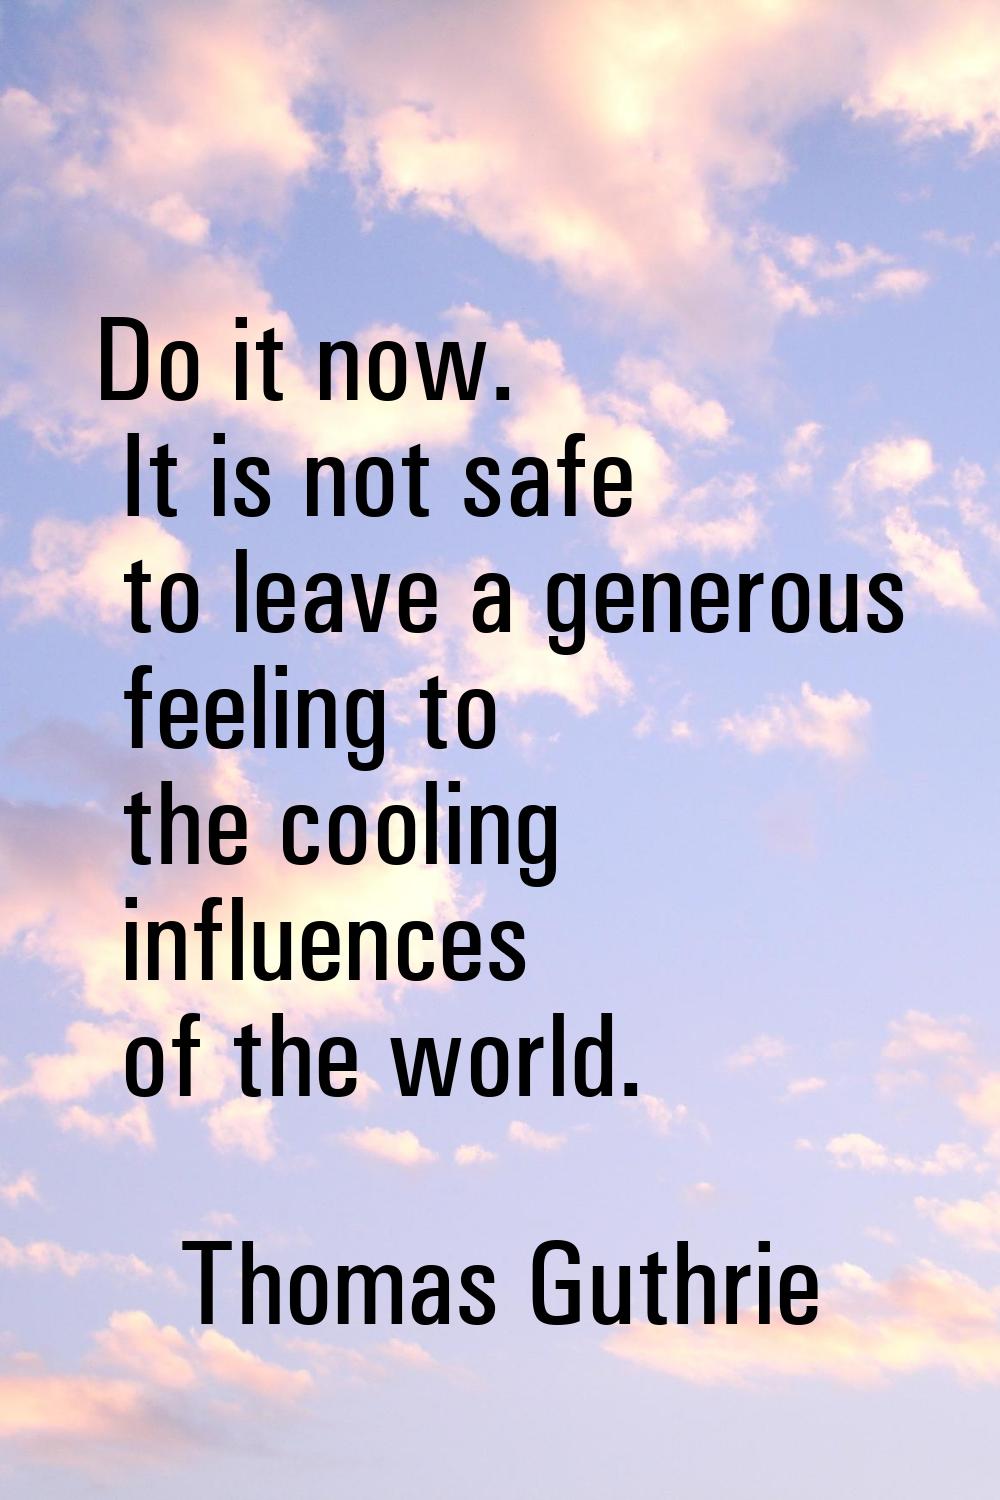 Do it now. It is not safe to leave a generous feeling to the cooling influences of the world.